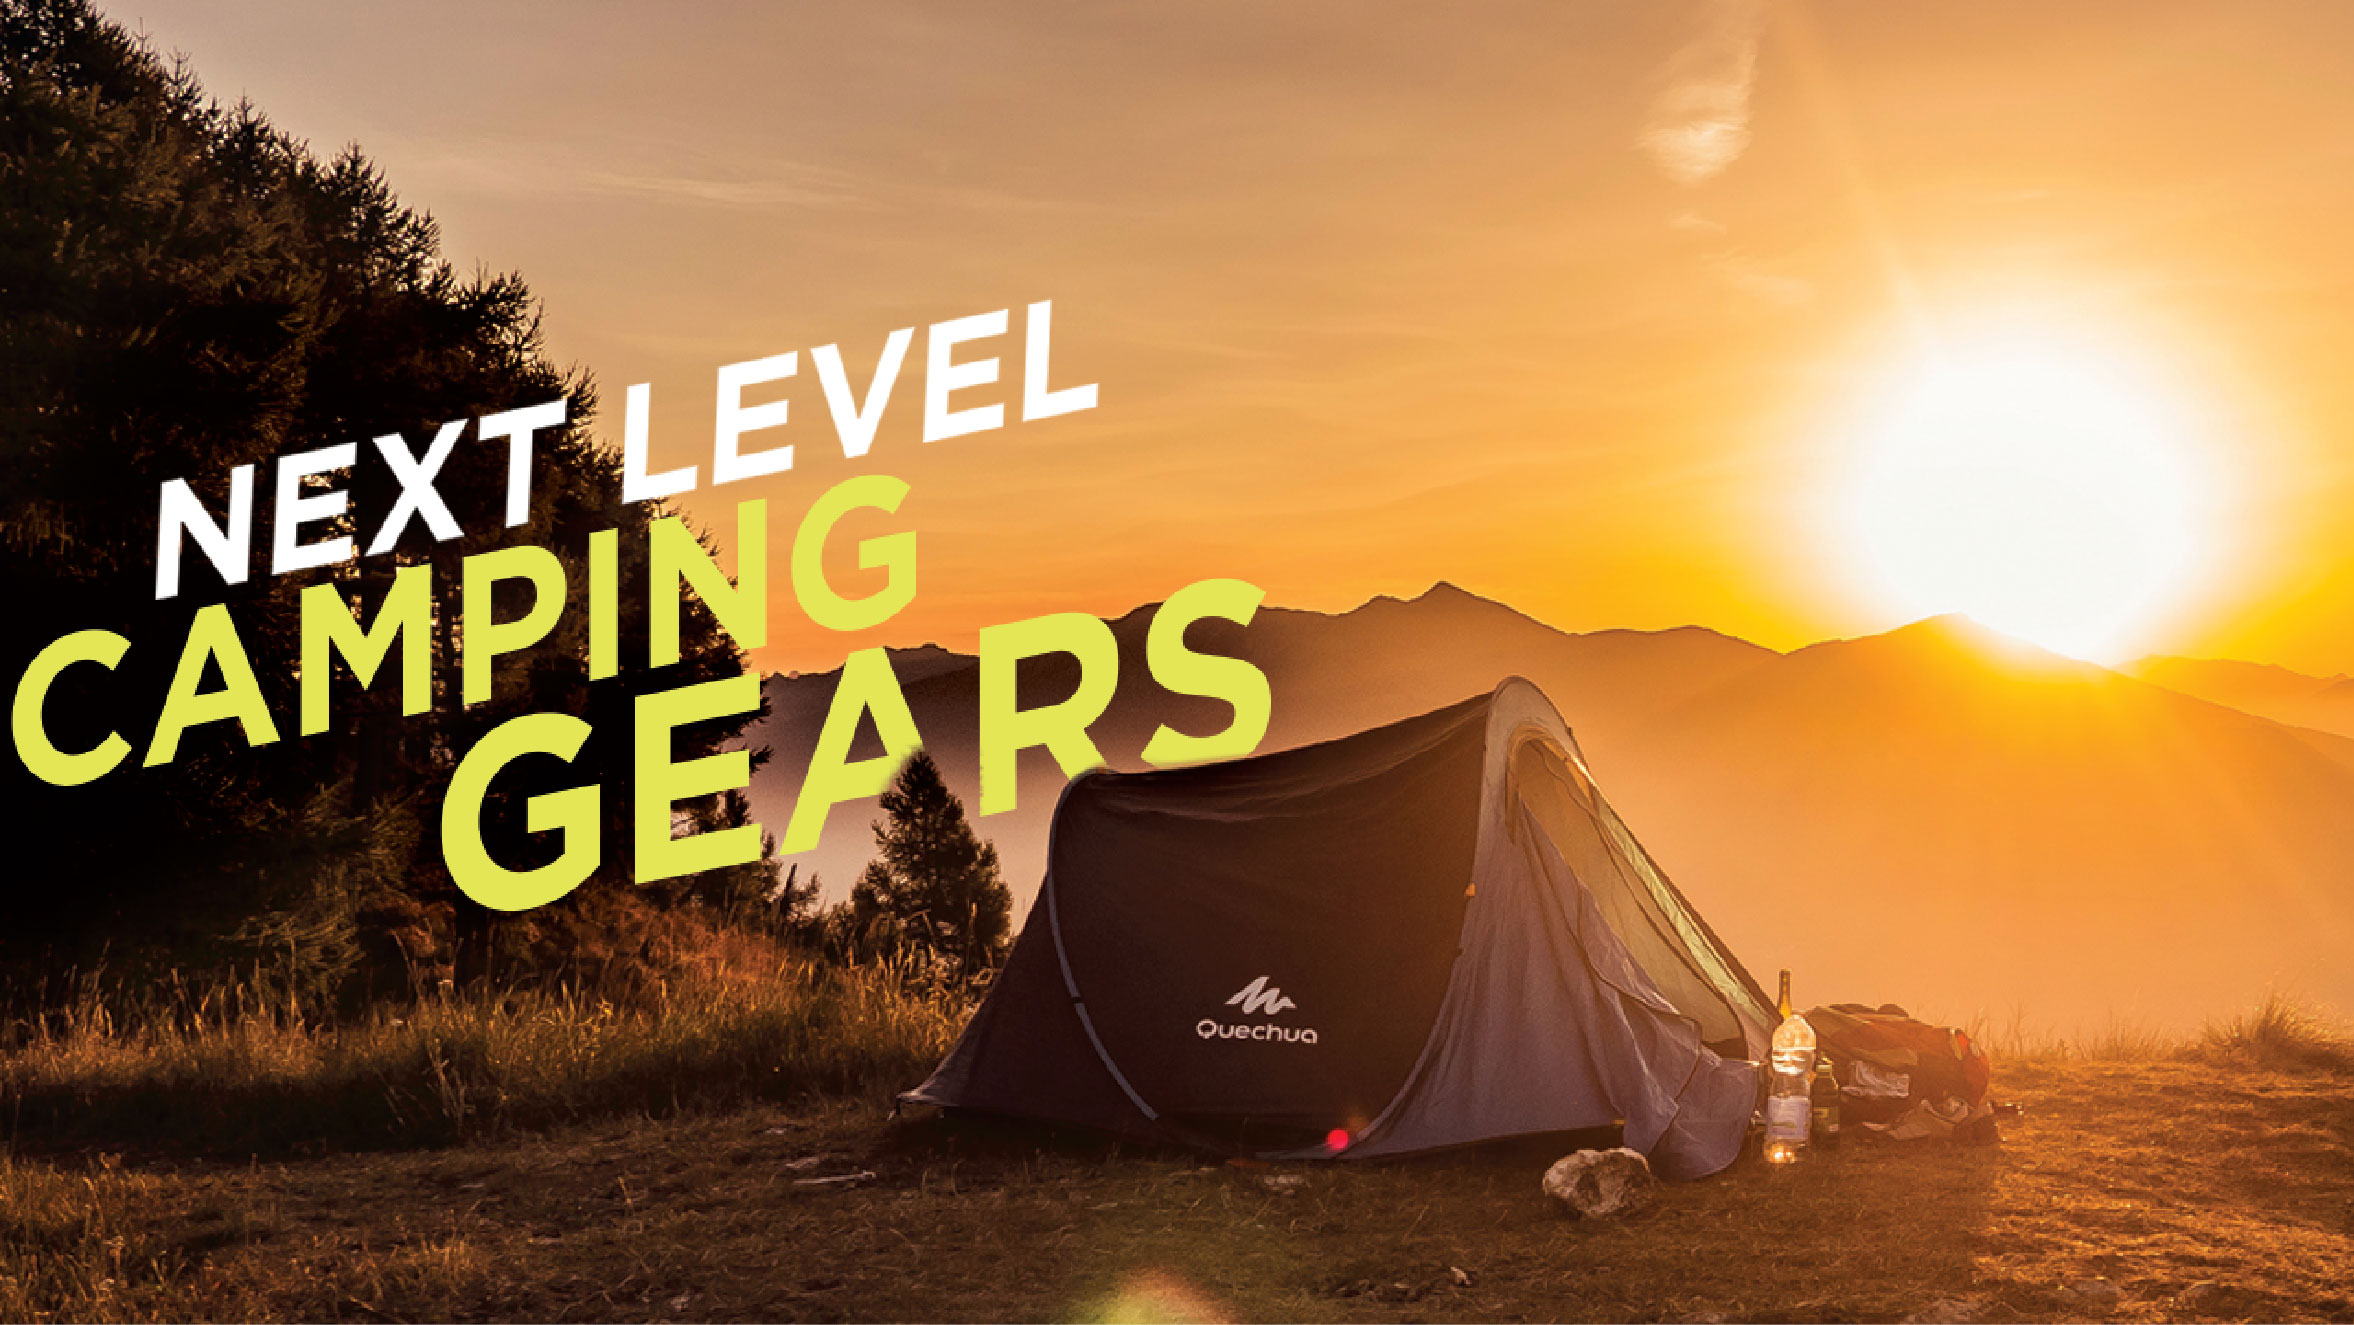 Essential Camping Gears to Have in 2023: Next Level Camping Gears